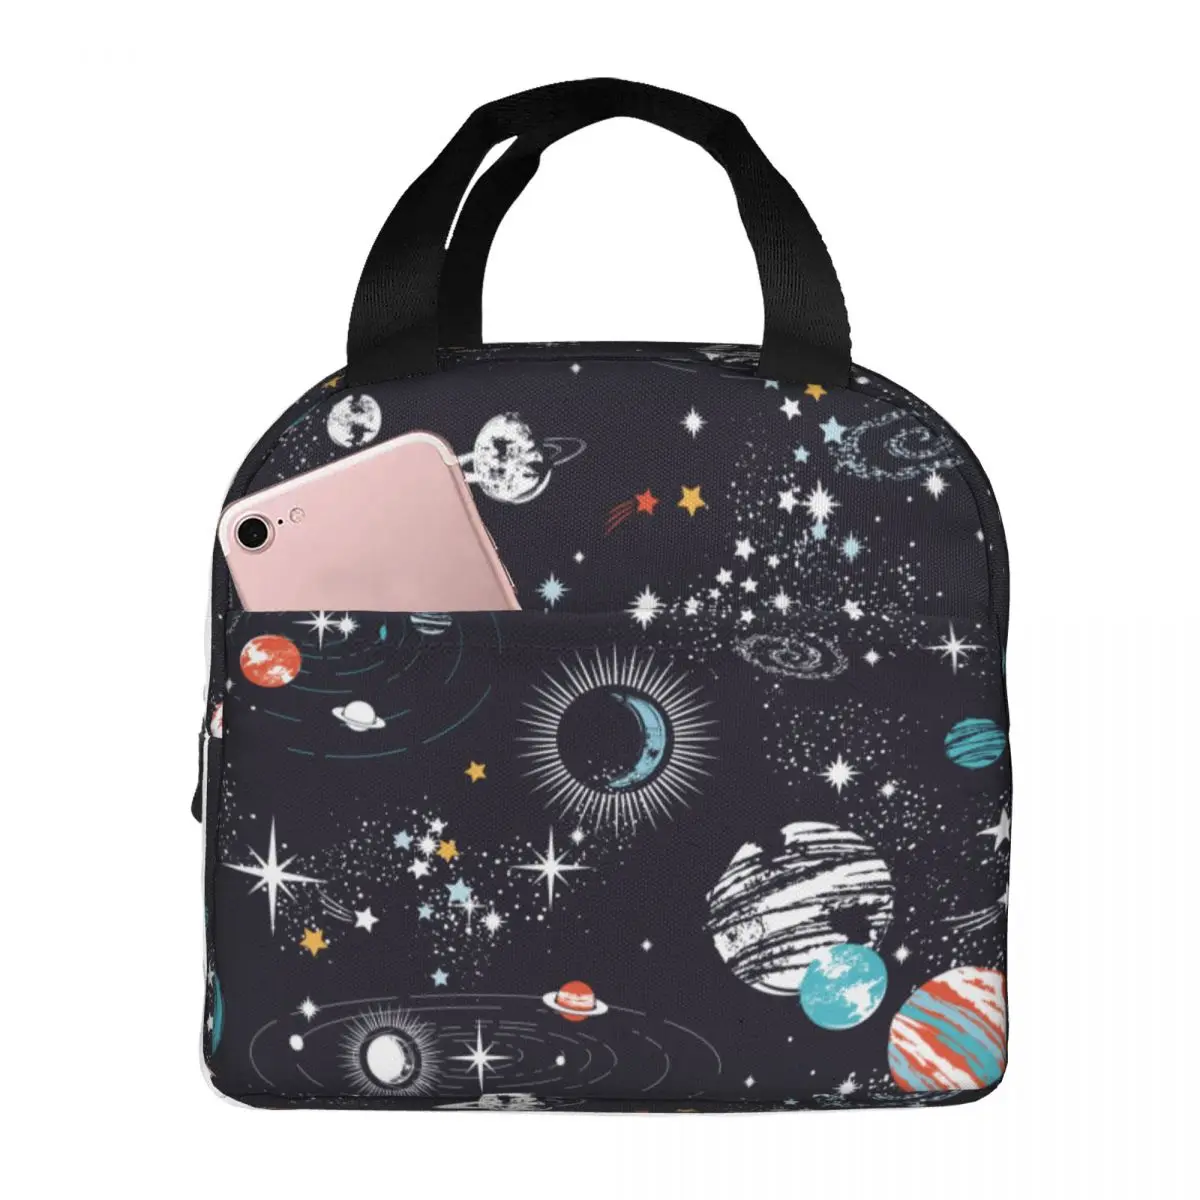 

Space Galaxy Constellation Zodiac Star Cooler Lunch Box Portable Insulated Lunch Bag Thermal Food Picnic Lunch Bags